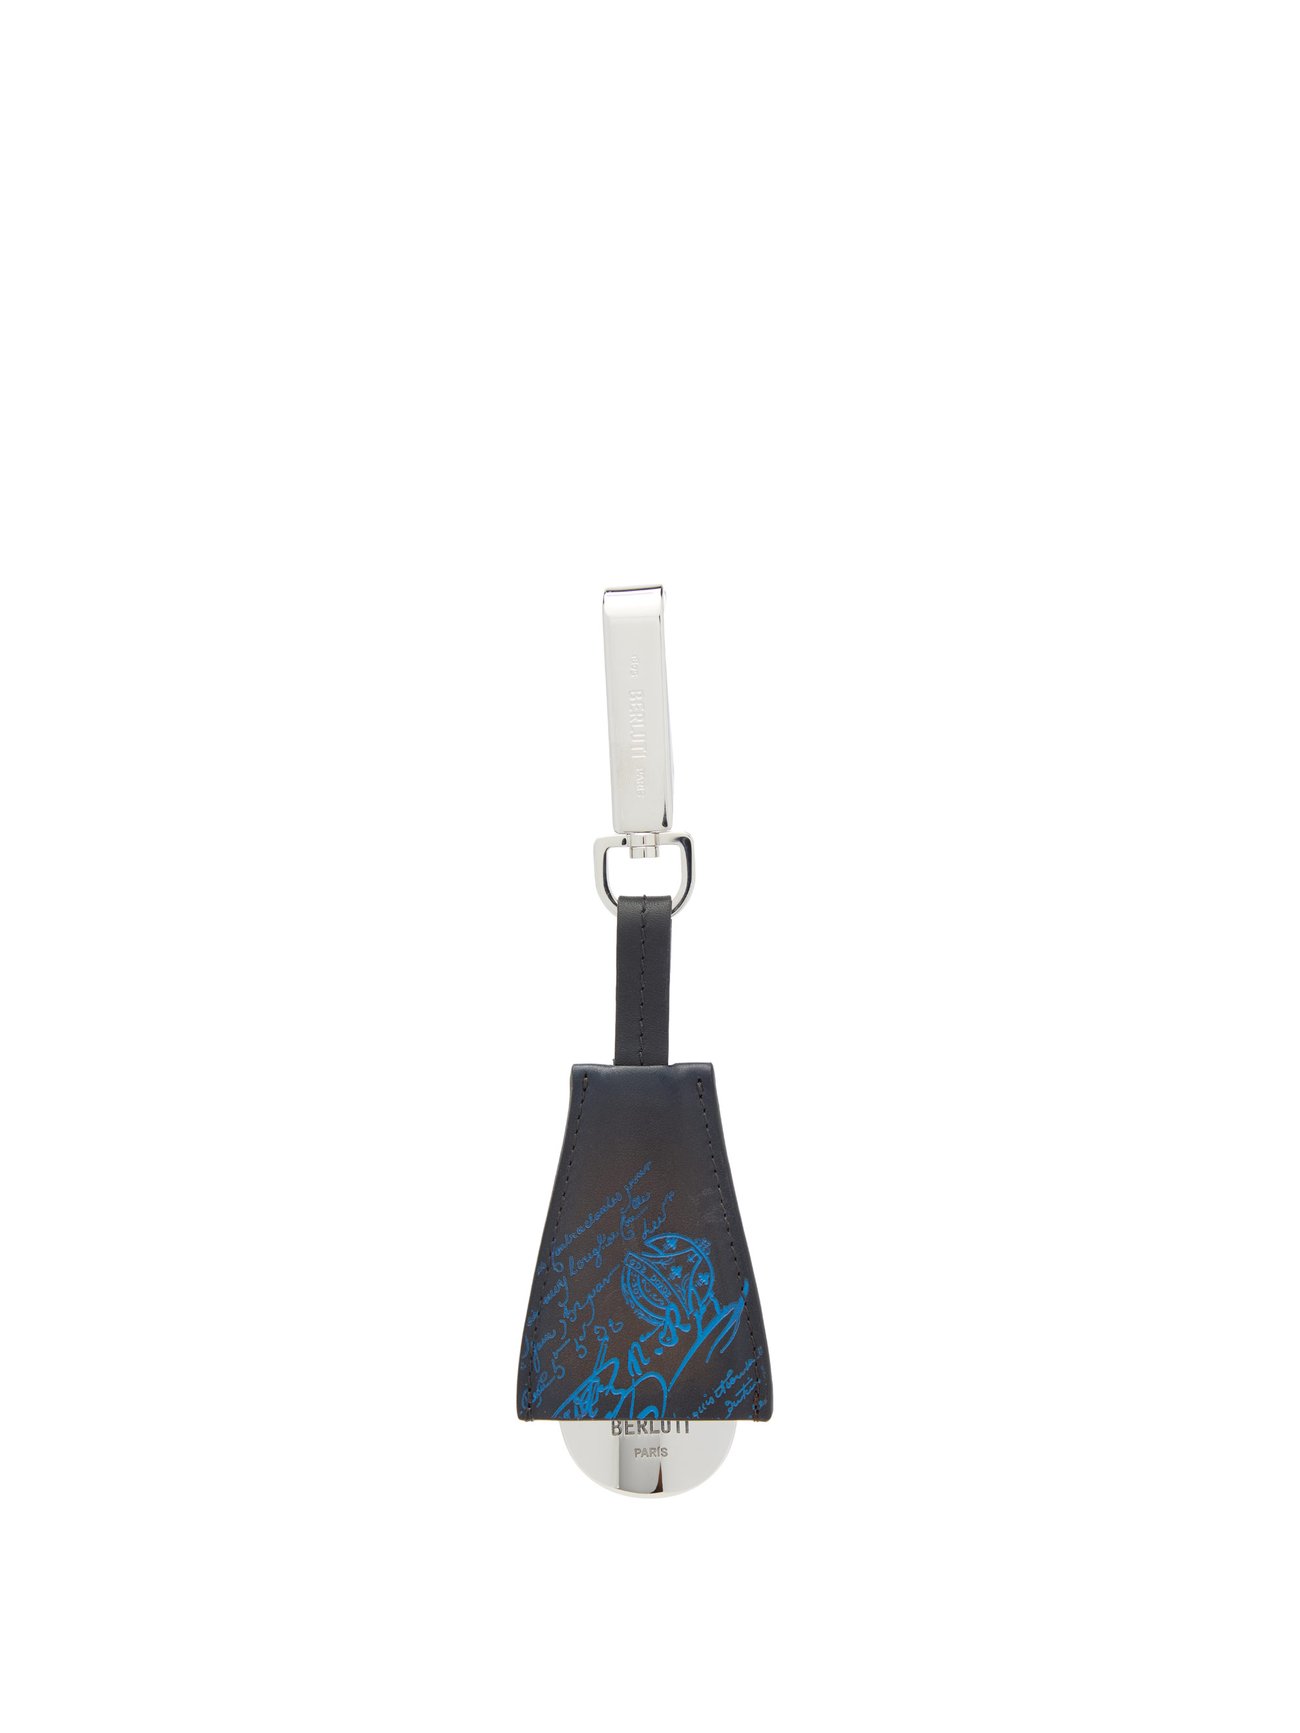 Blue Scritto leather shoehorn key ring | Berluti | MATCHESFASHION US